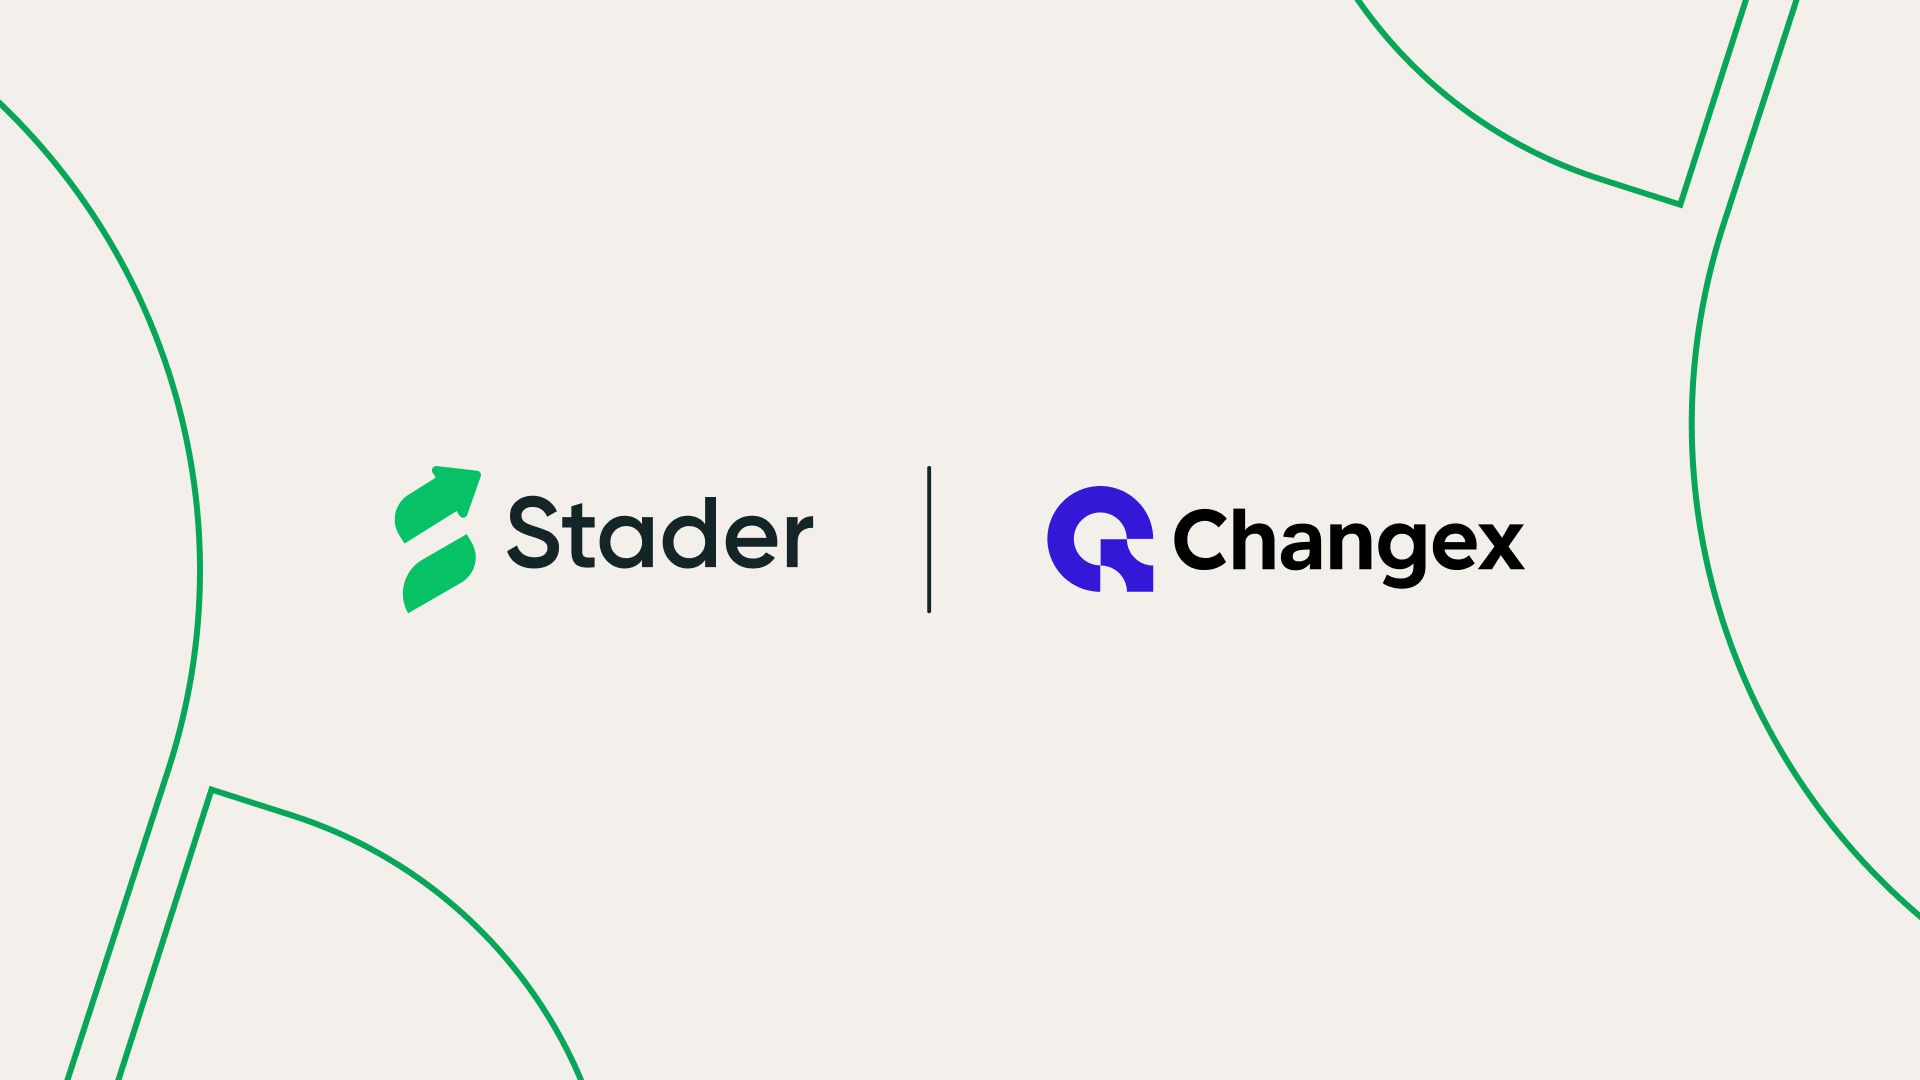 Attention all MATIC stakers: Changex partners with Stader to offer up to 7% APY on liquid staking